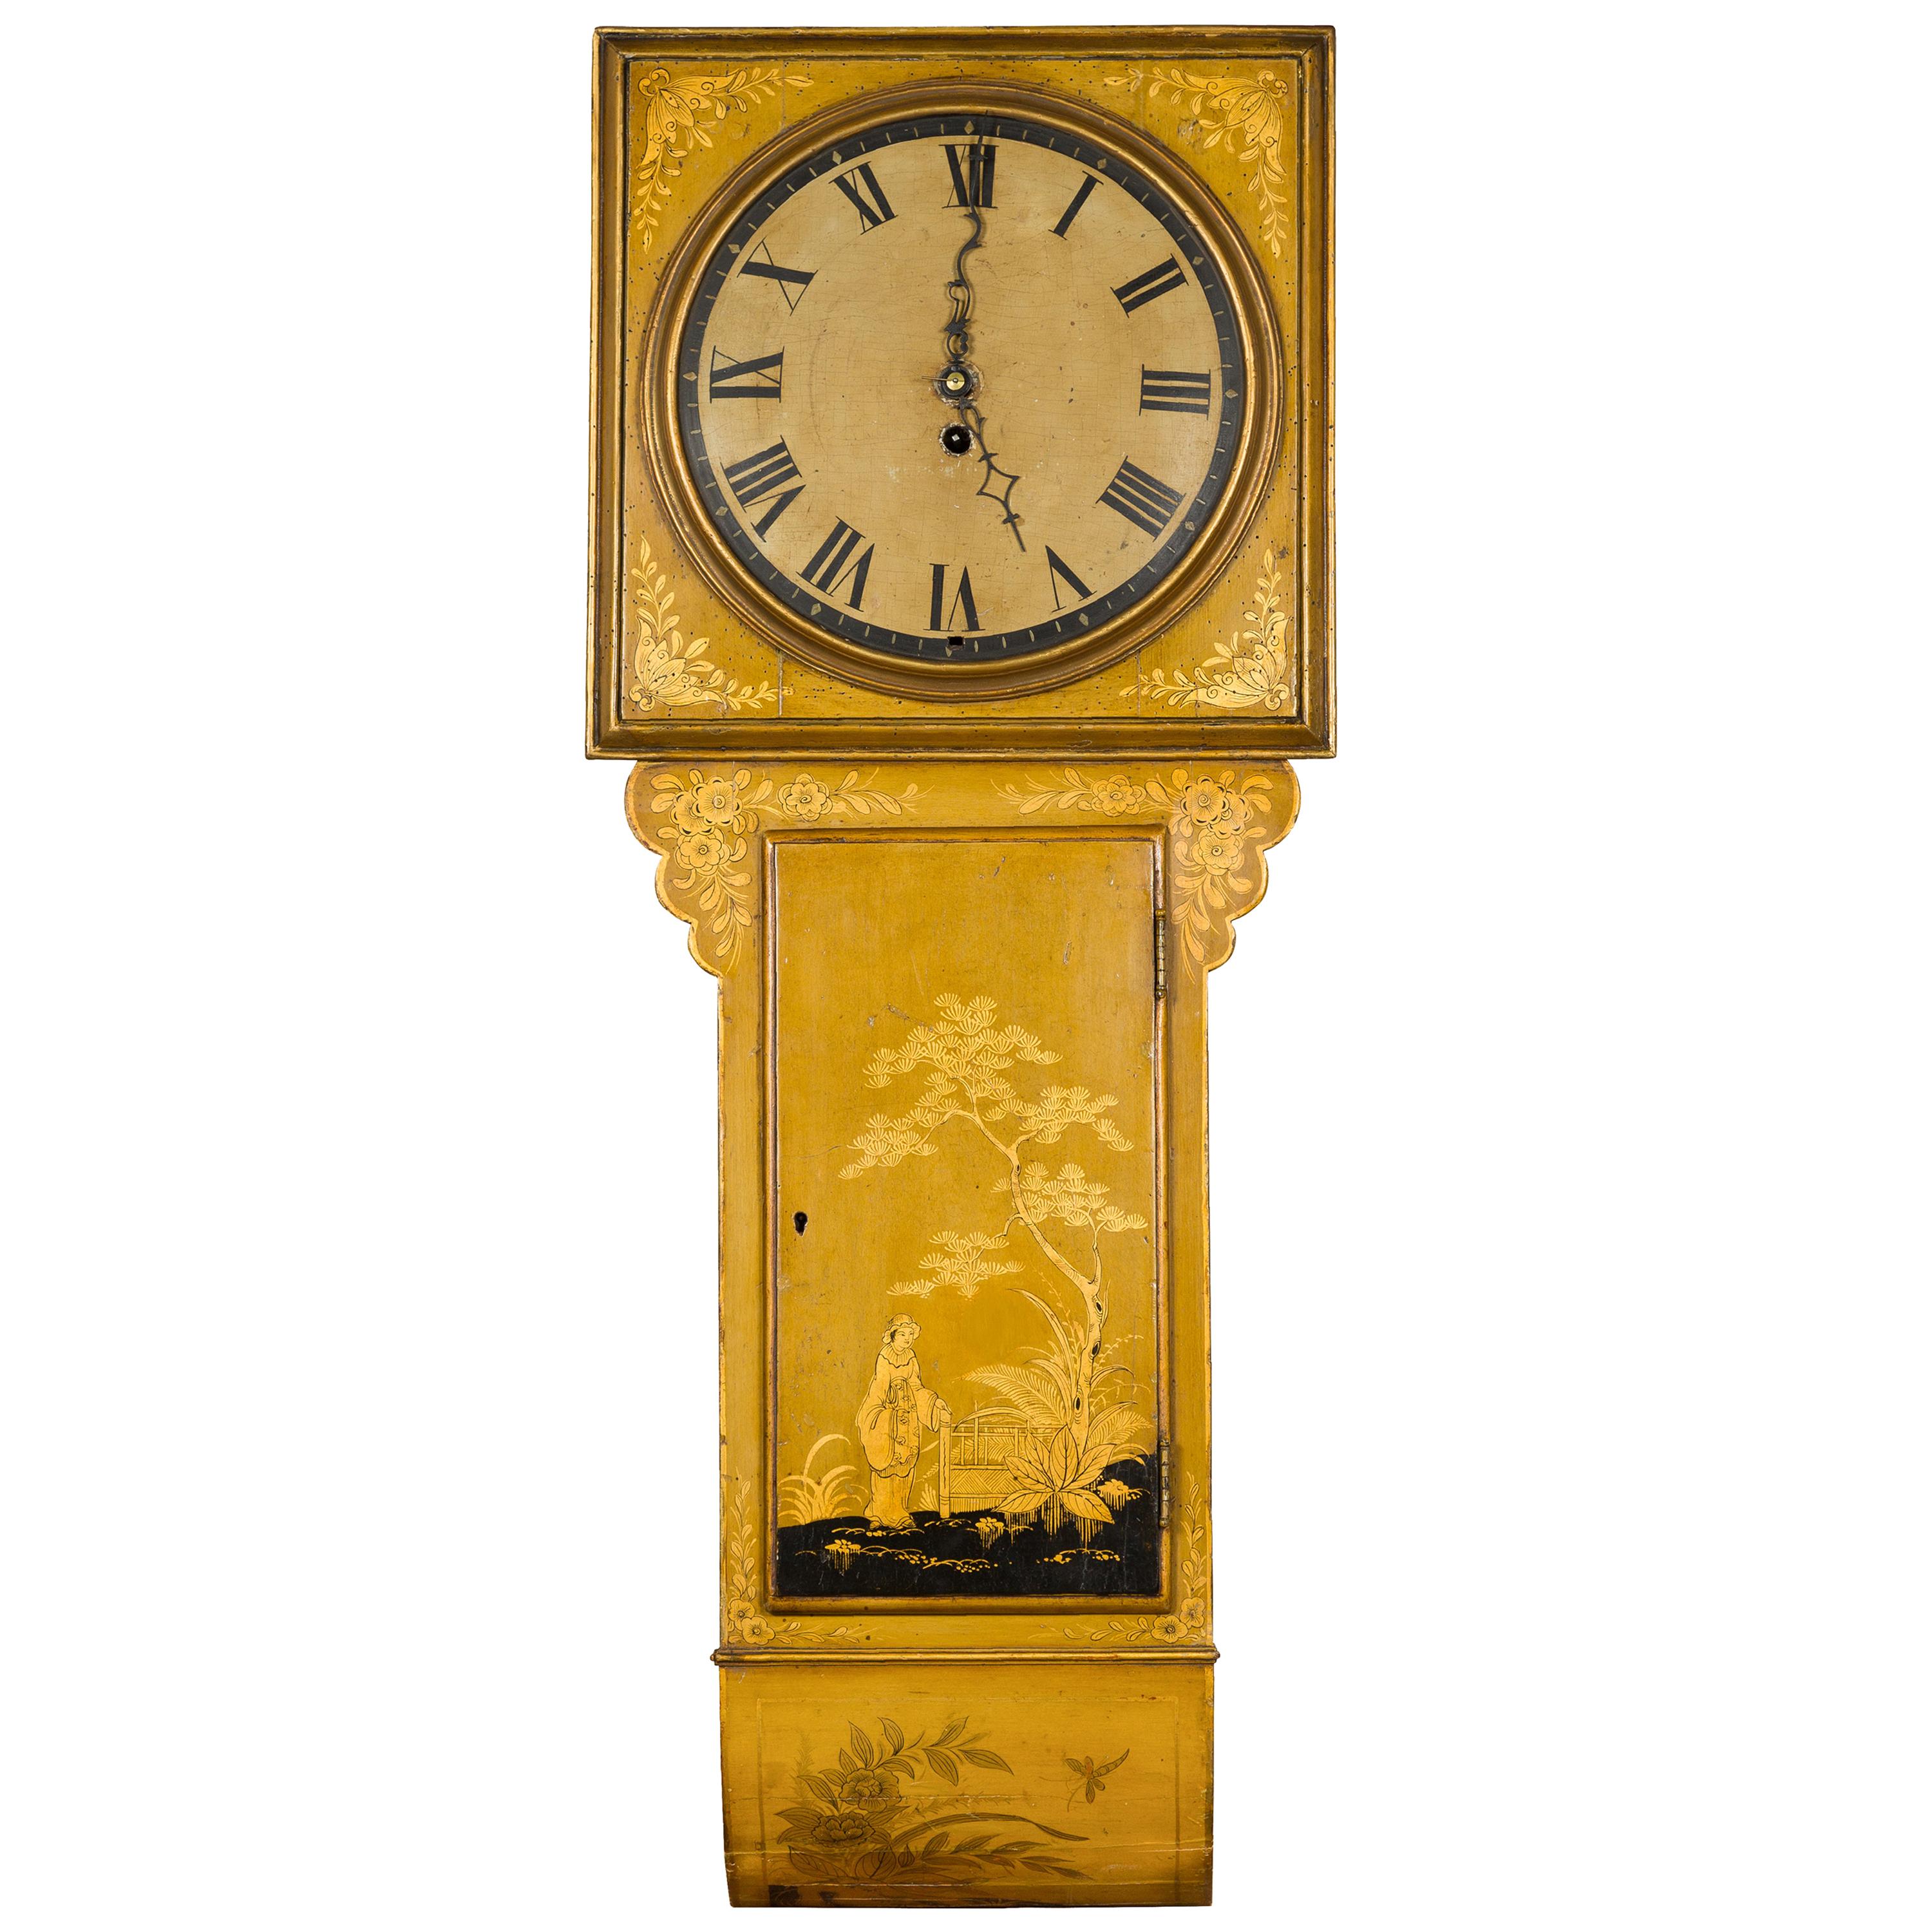 English Regency Period 1820s Golden Toned Wall Clock with Chinoiserie Décor